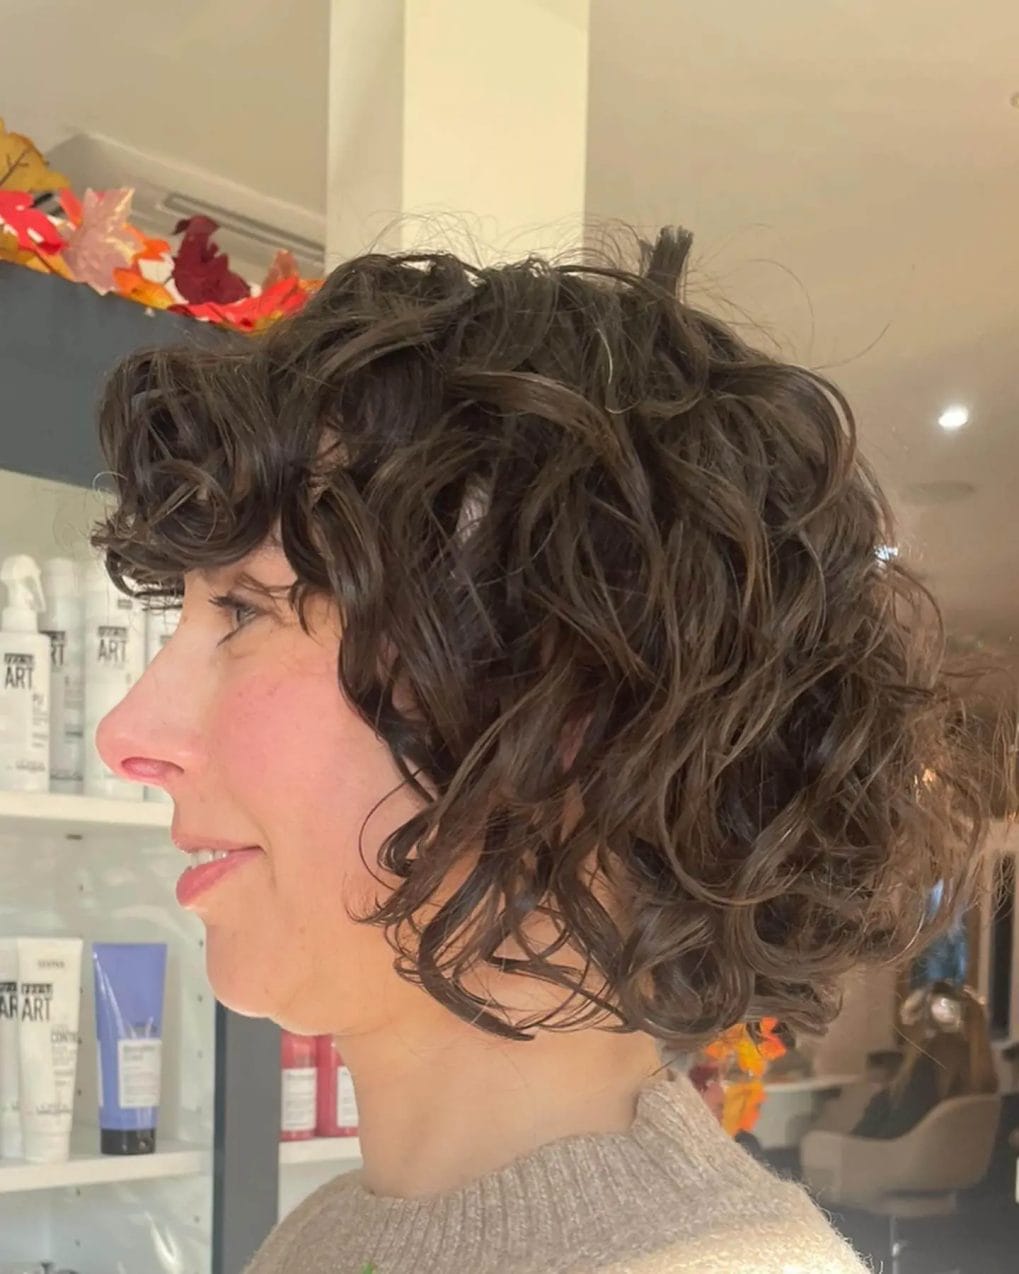 Chin-length bob with sculpted curls and subtle highlights.
